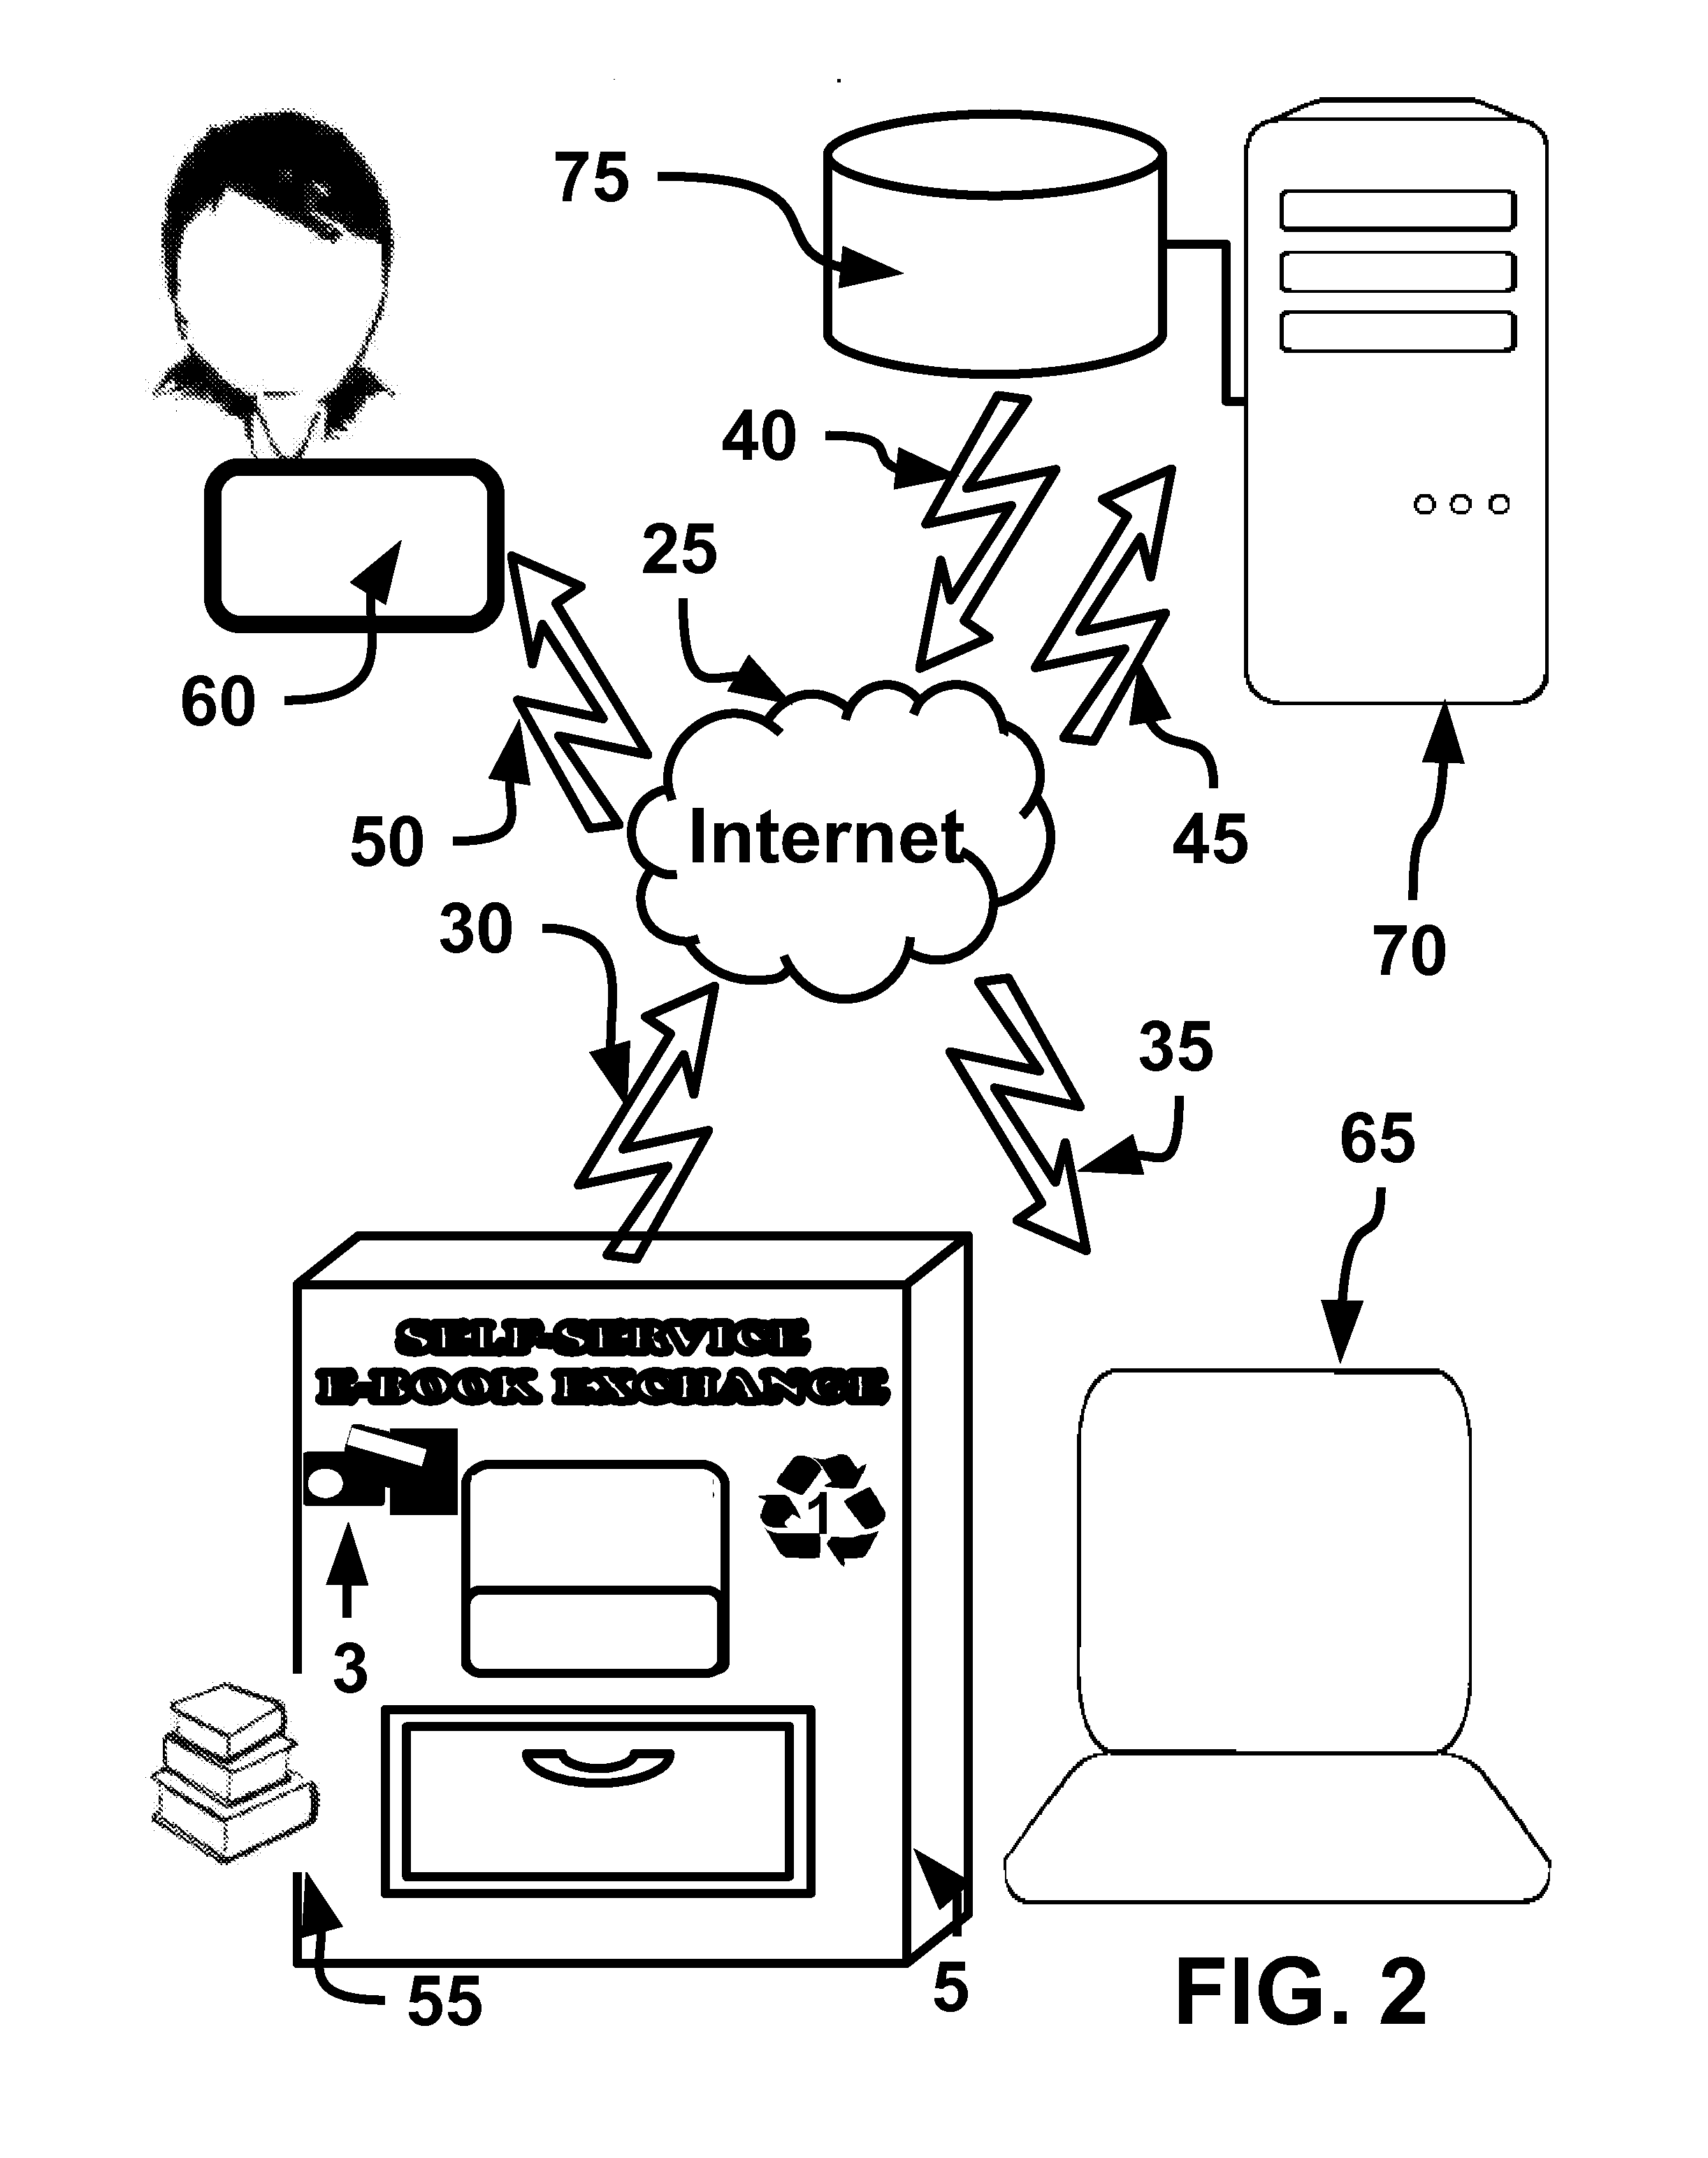 Apparatus, method and system of replacing physical versions of works with electronic versions